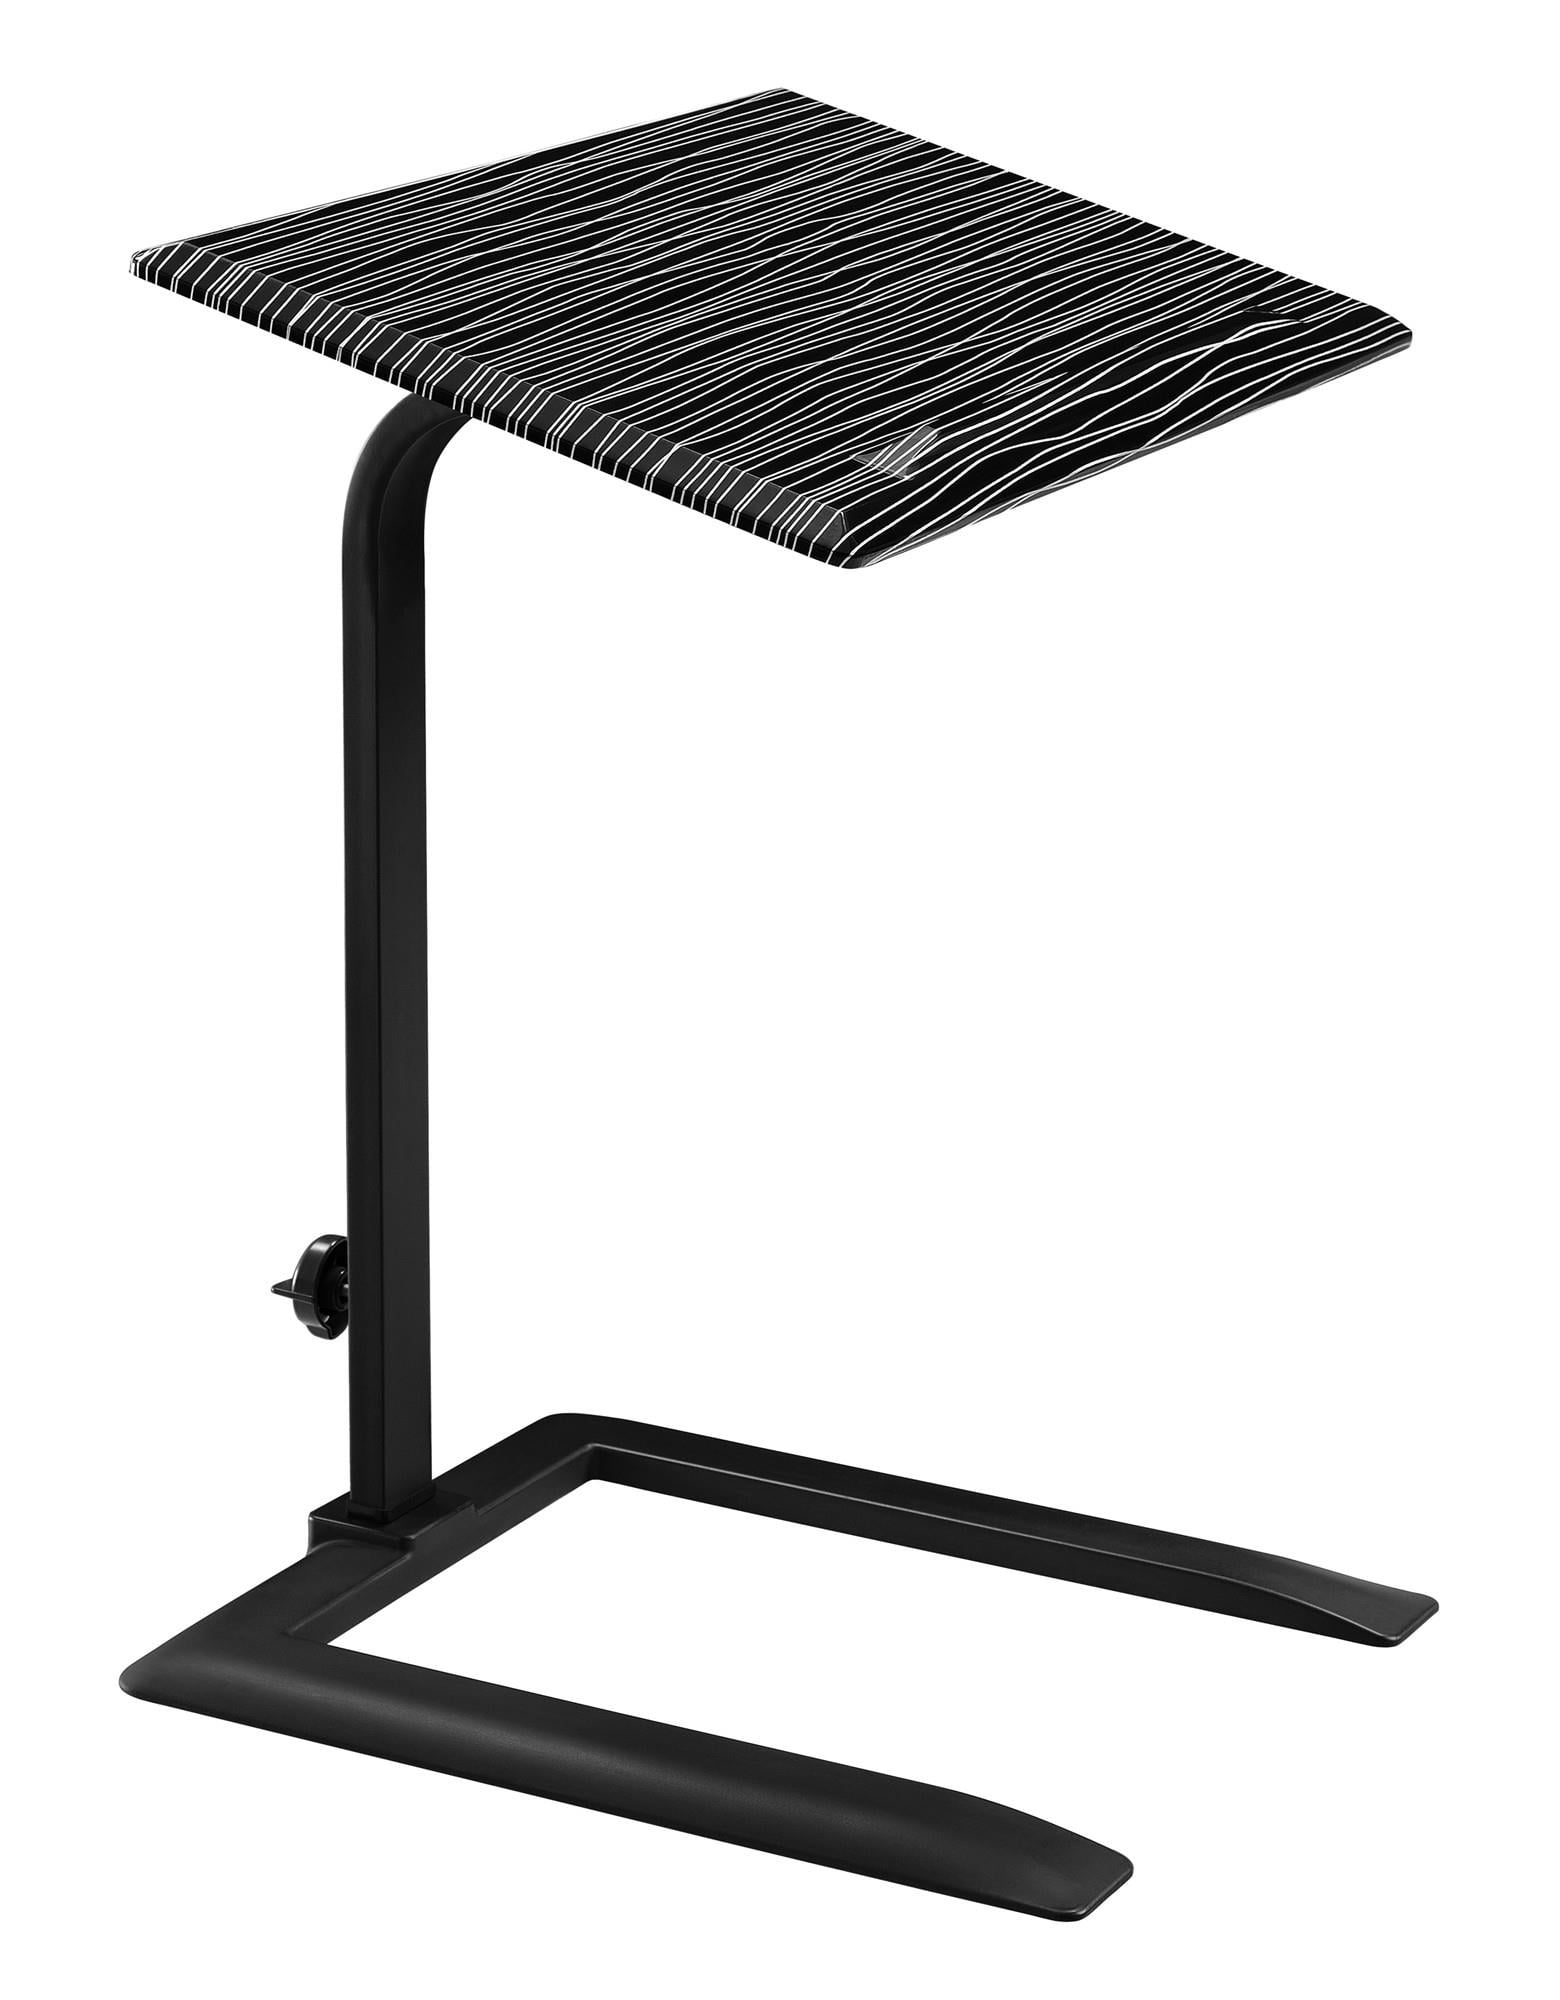 Altra Furniture Adjustable Laptop Stand for Home Office ...